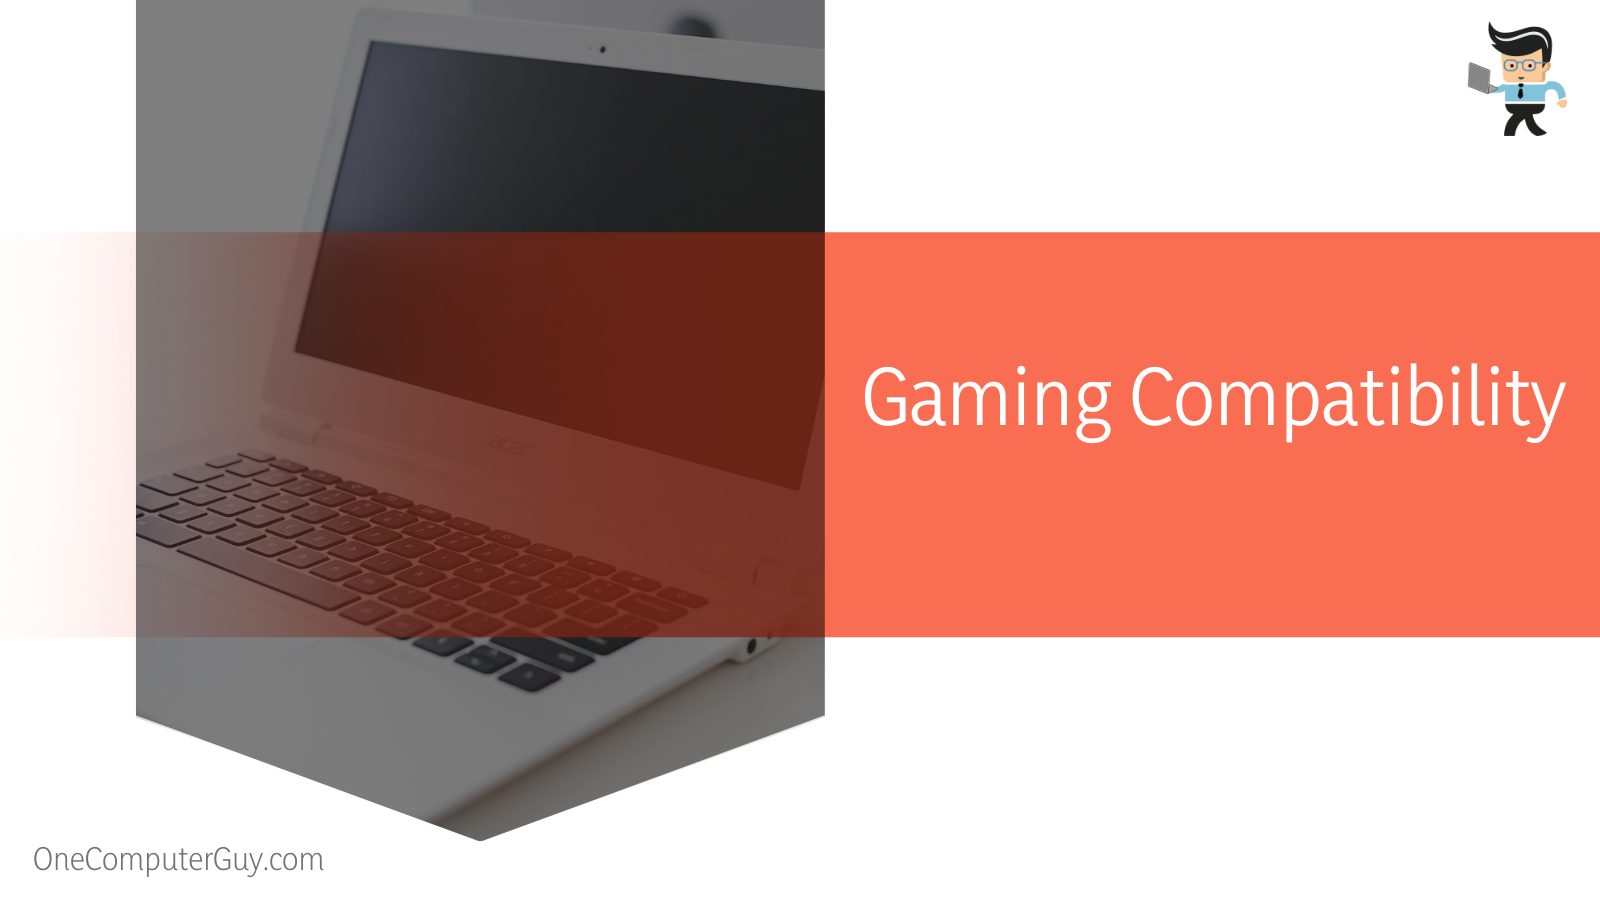 Acer Laptop Gaming Compatibility